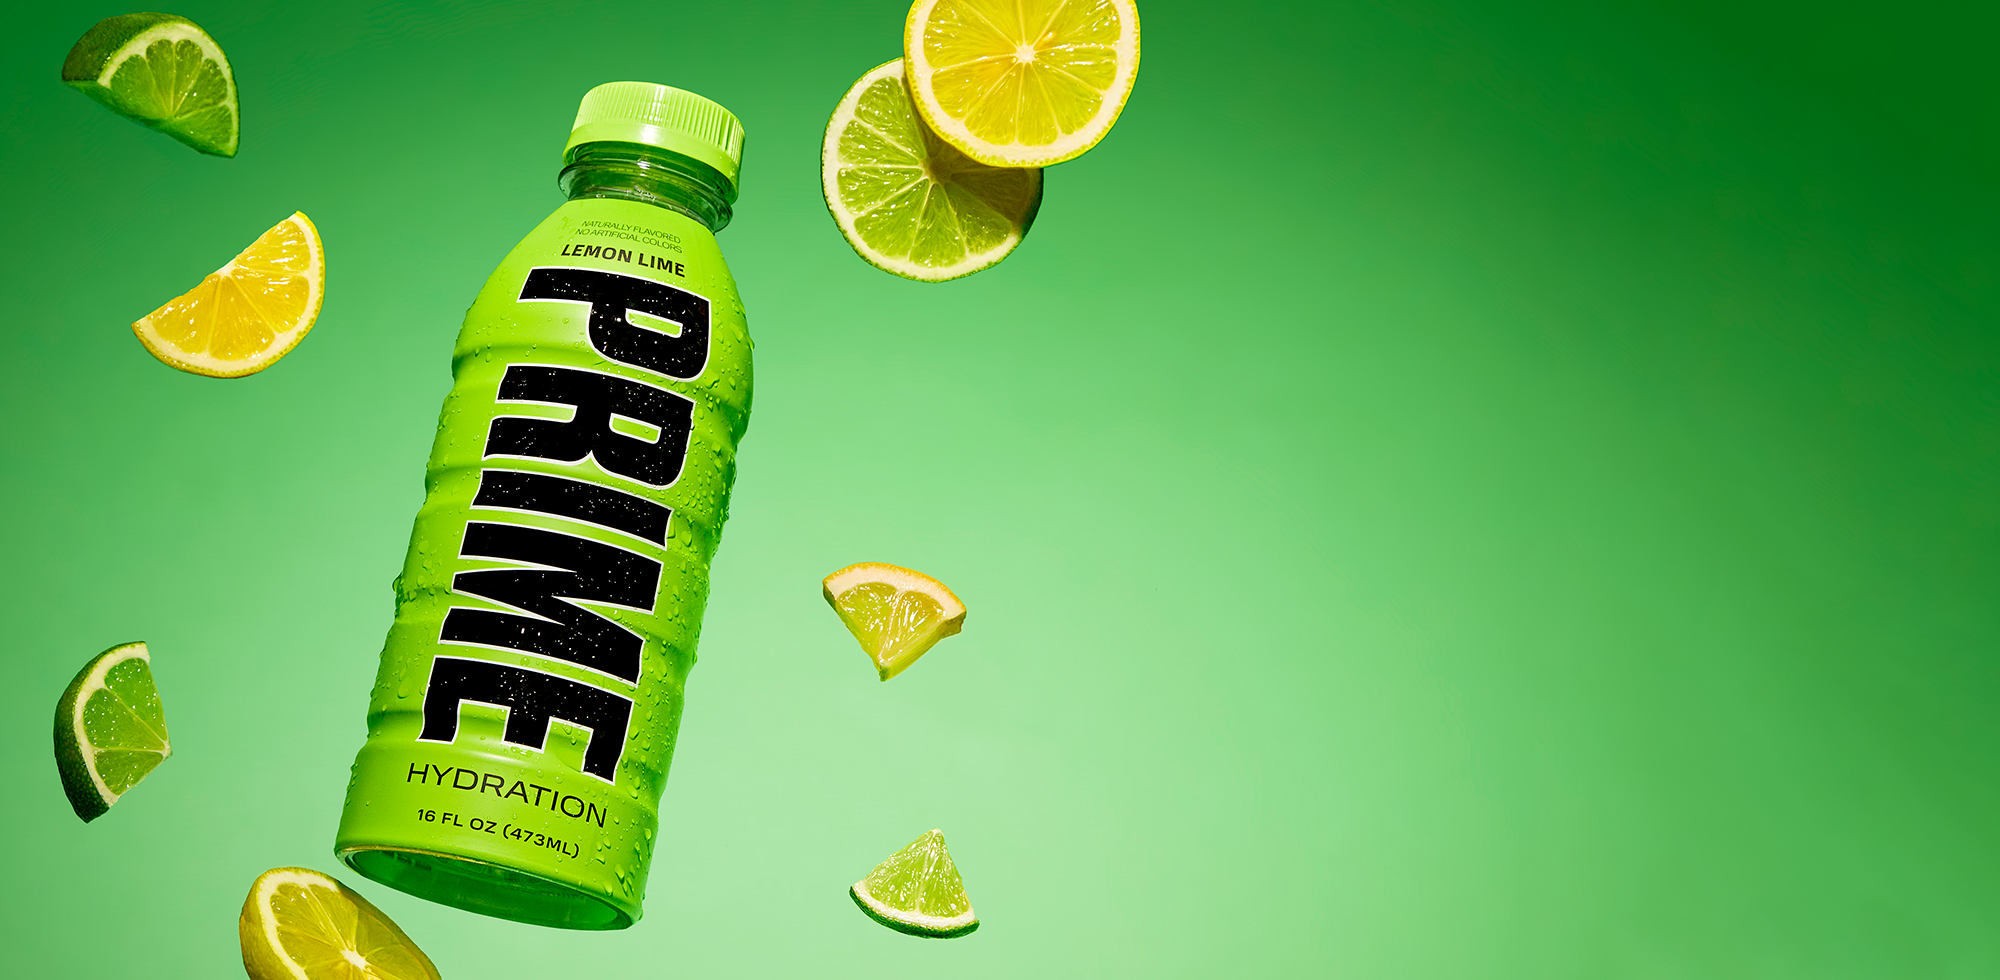 A green bottle of 'PRIME' hydration drink in lemon-lime flavor, surrounded by sliced citrus fruits, against a vivid lime green display.